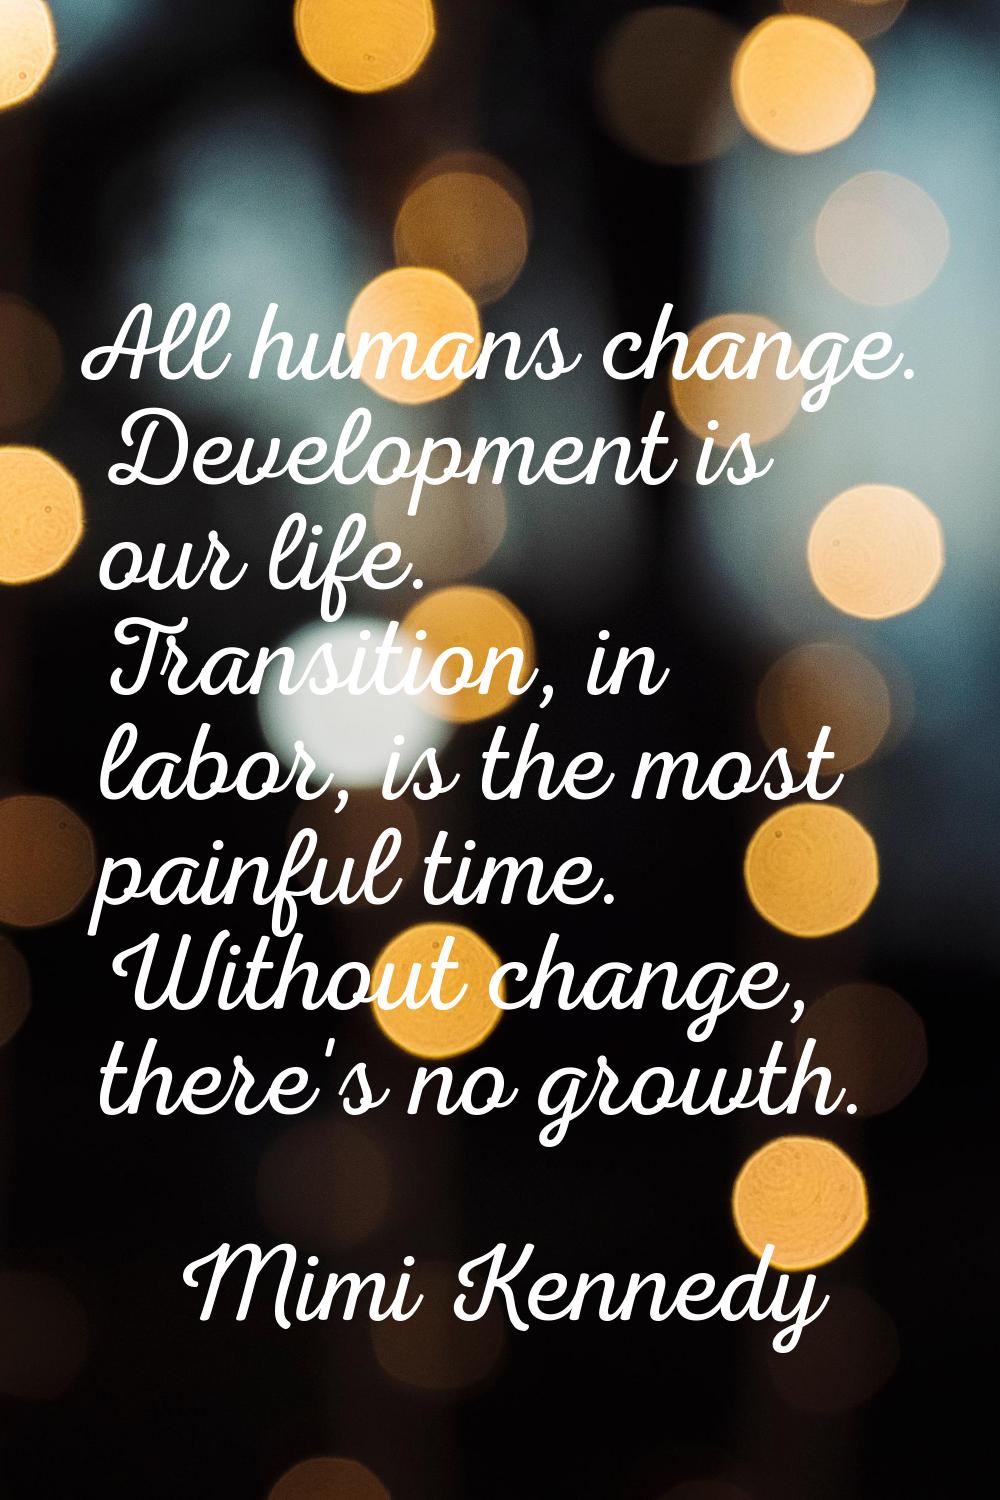 All humans change. Development is our life. Transition, in labor, is the most painful time. Without